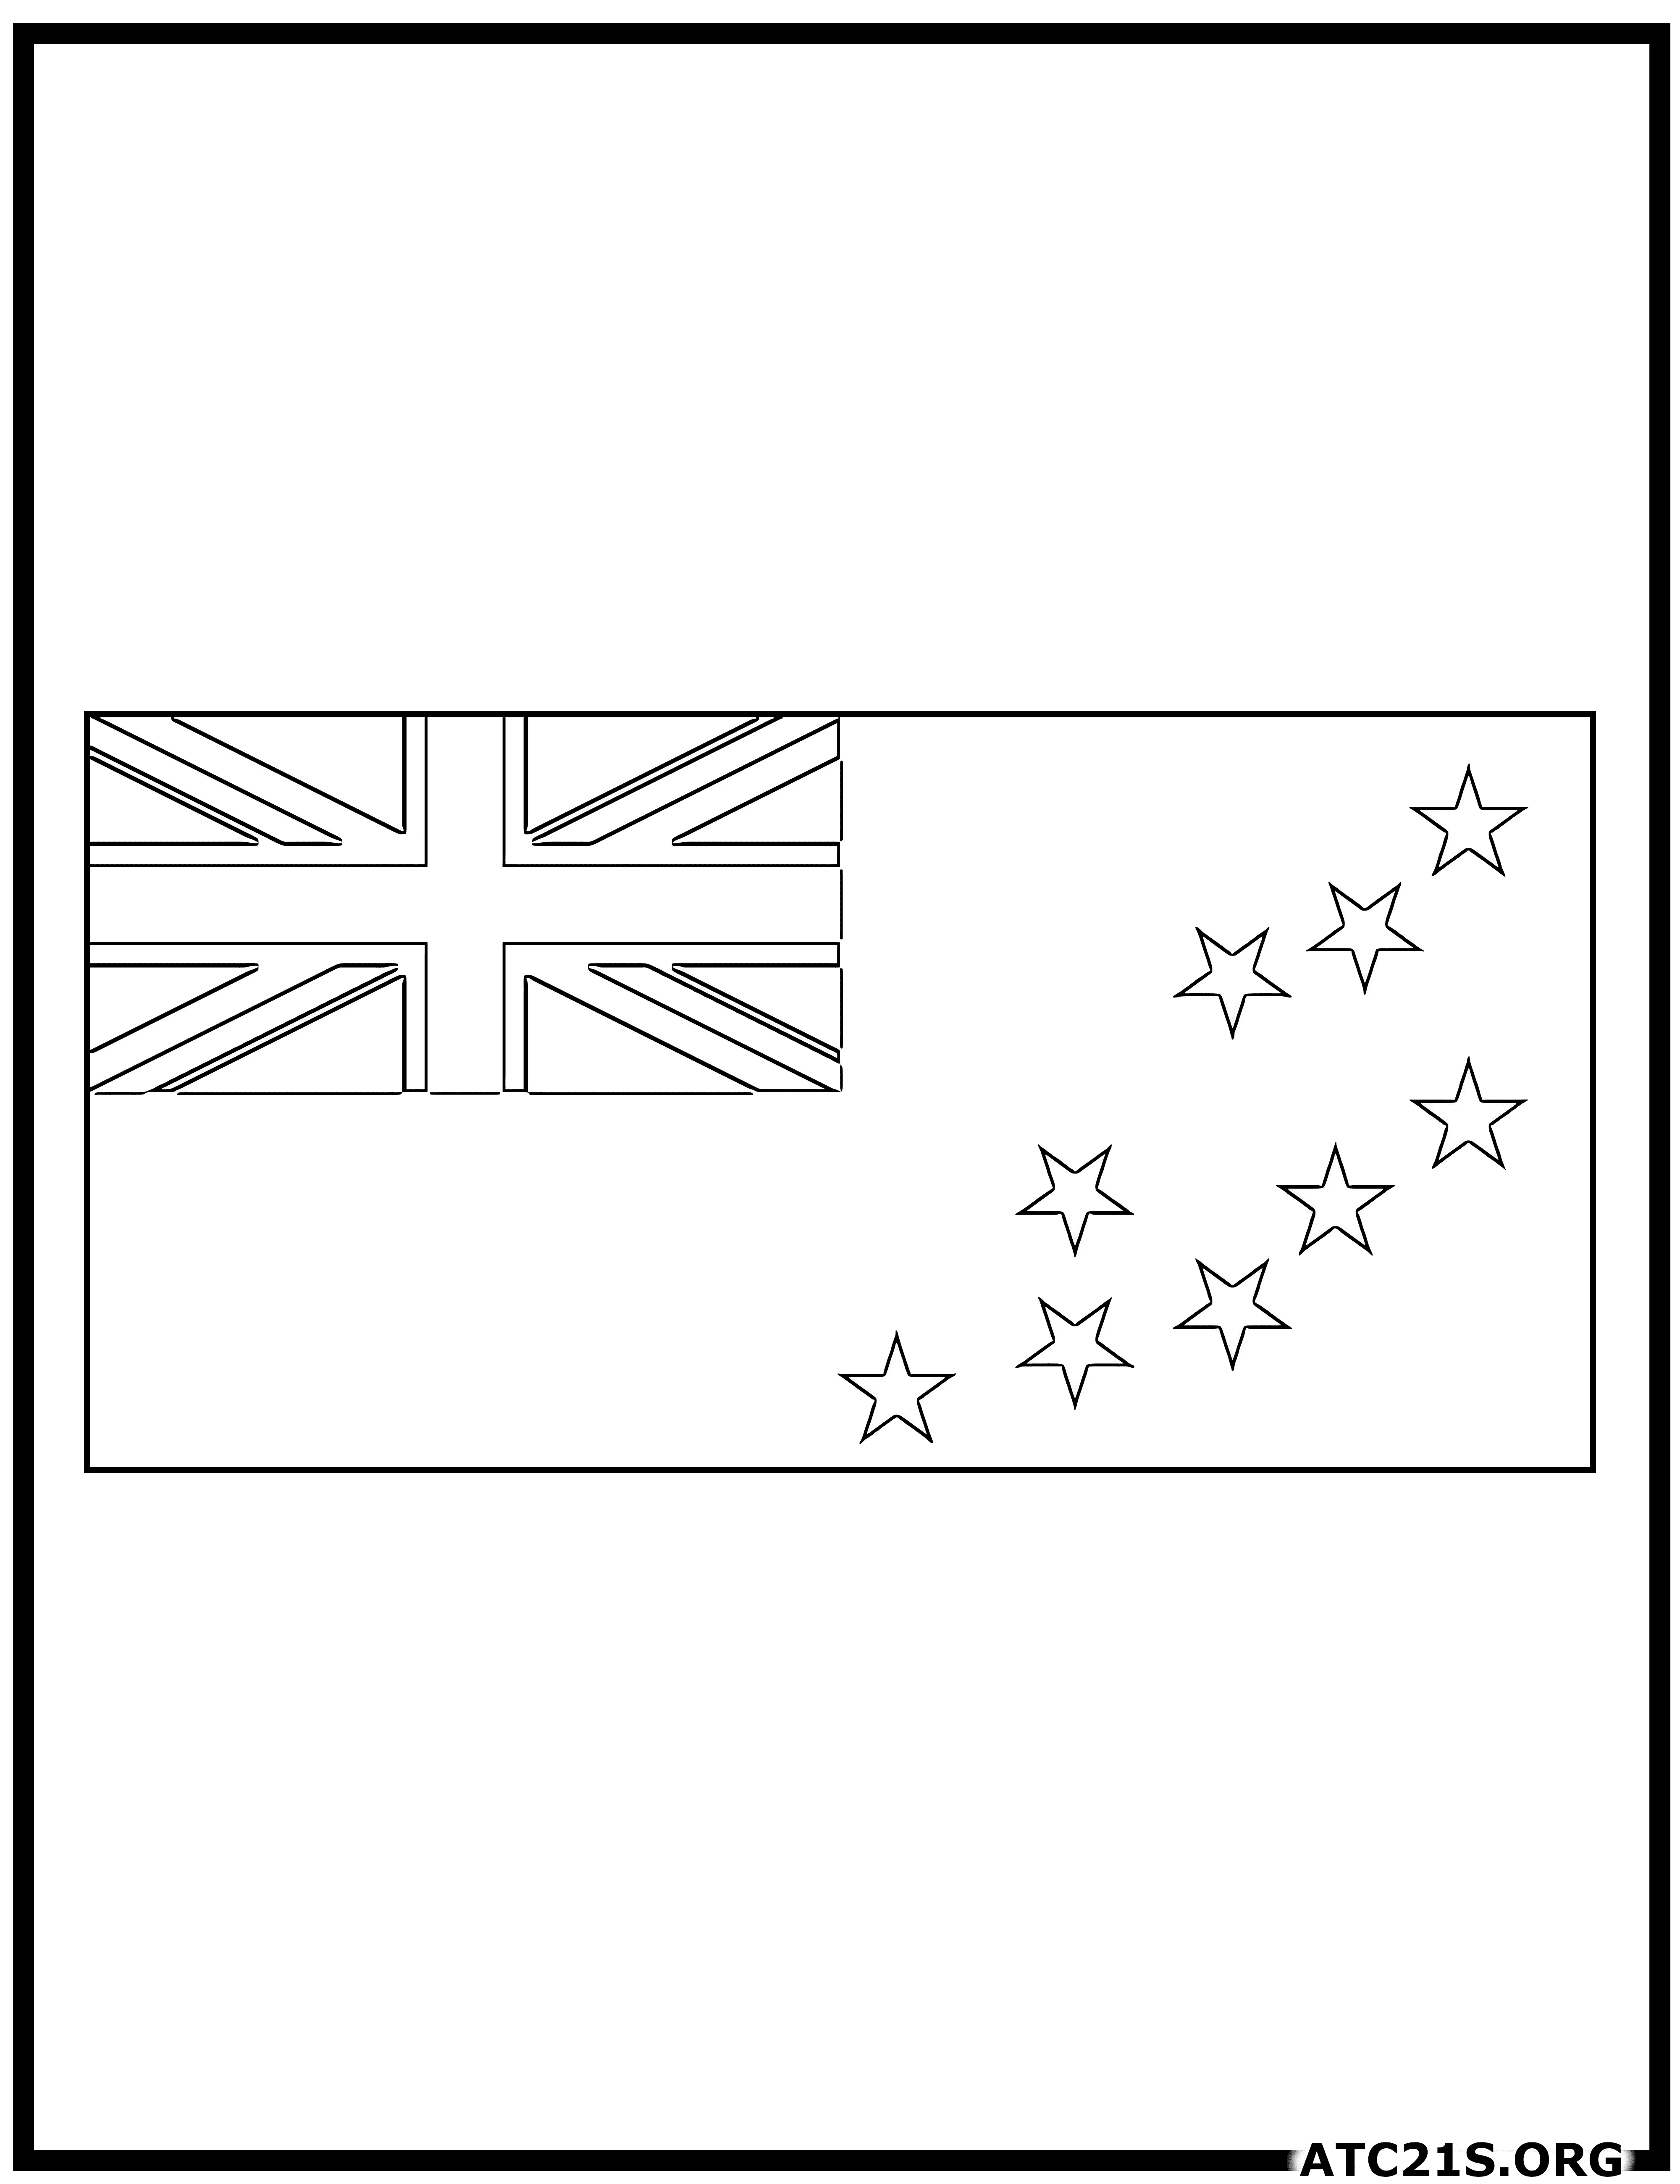 Tuvalu_flag_coloring_page